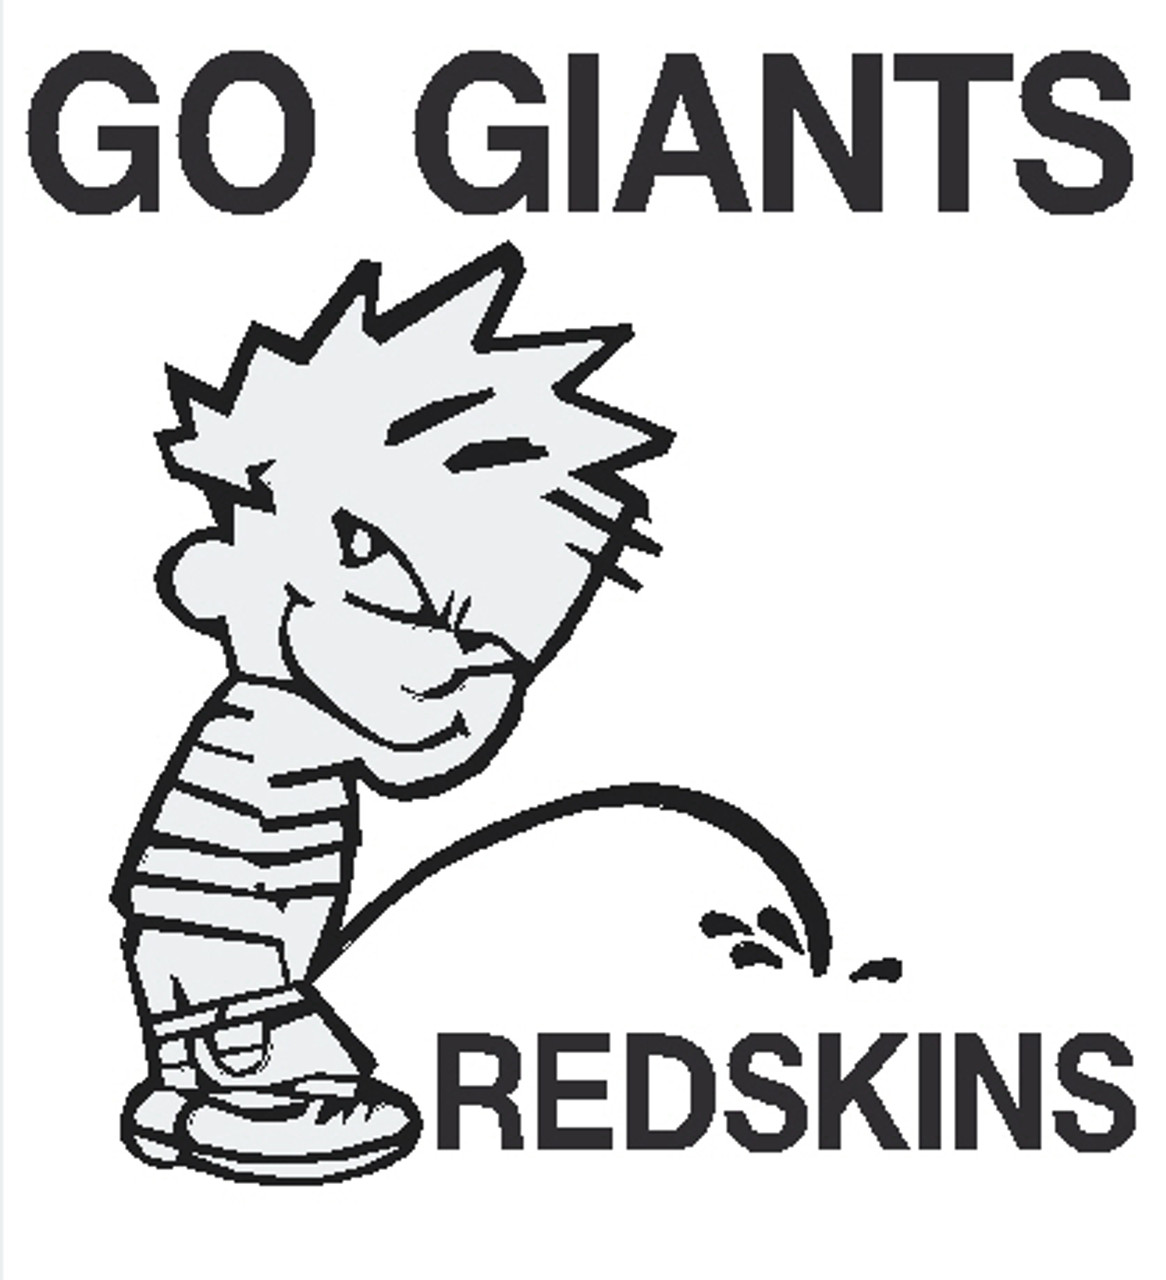 Giants piss on Redskins Decal